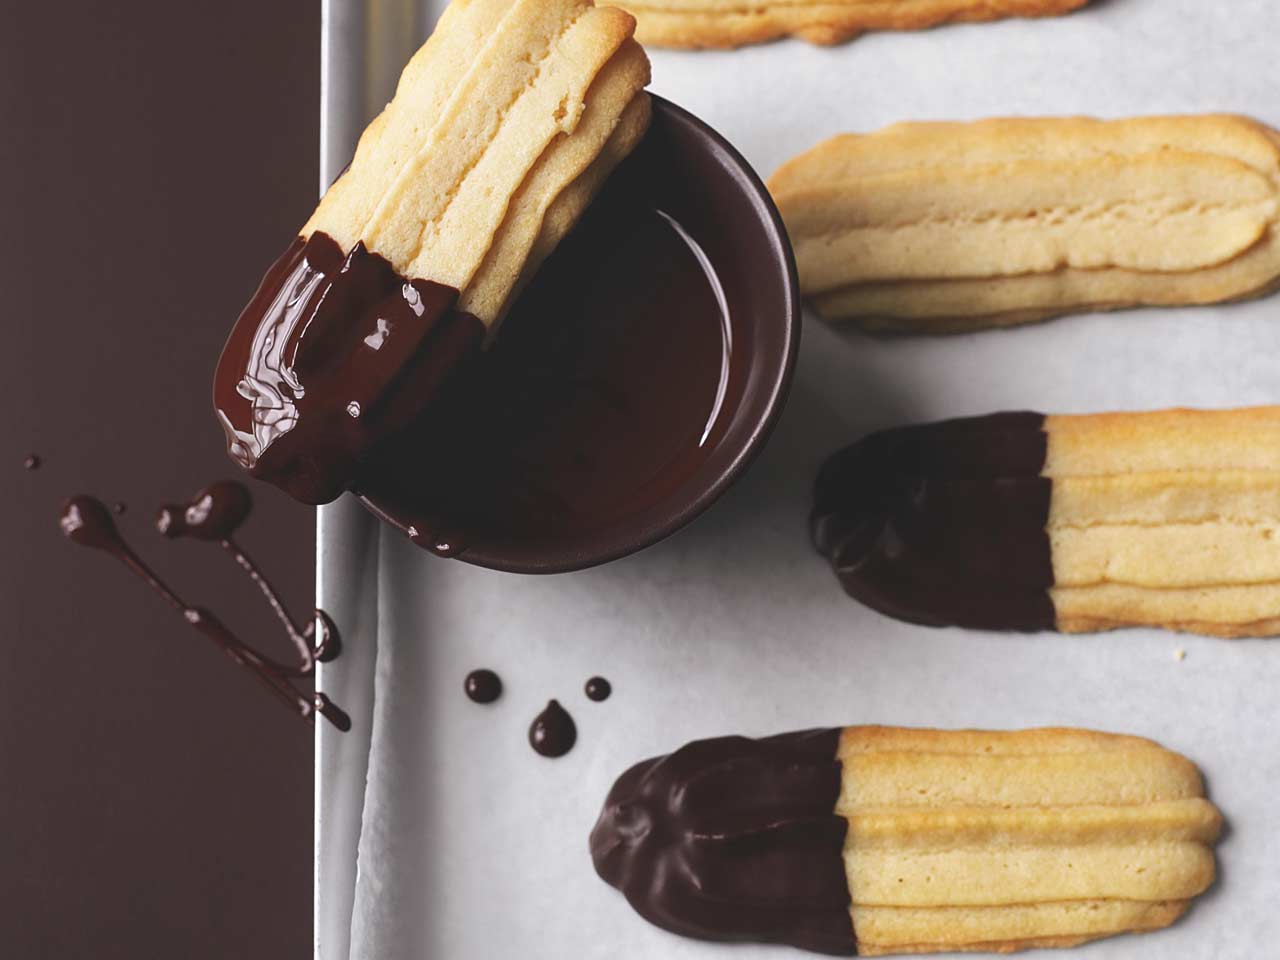 Chocolate Viennese fingers